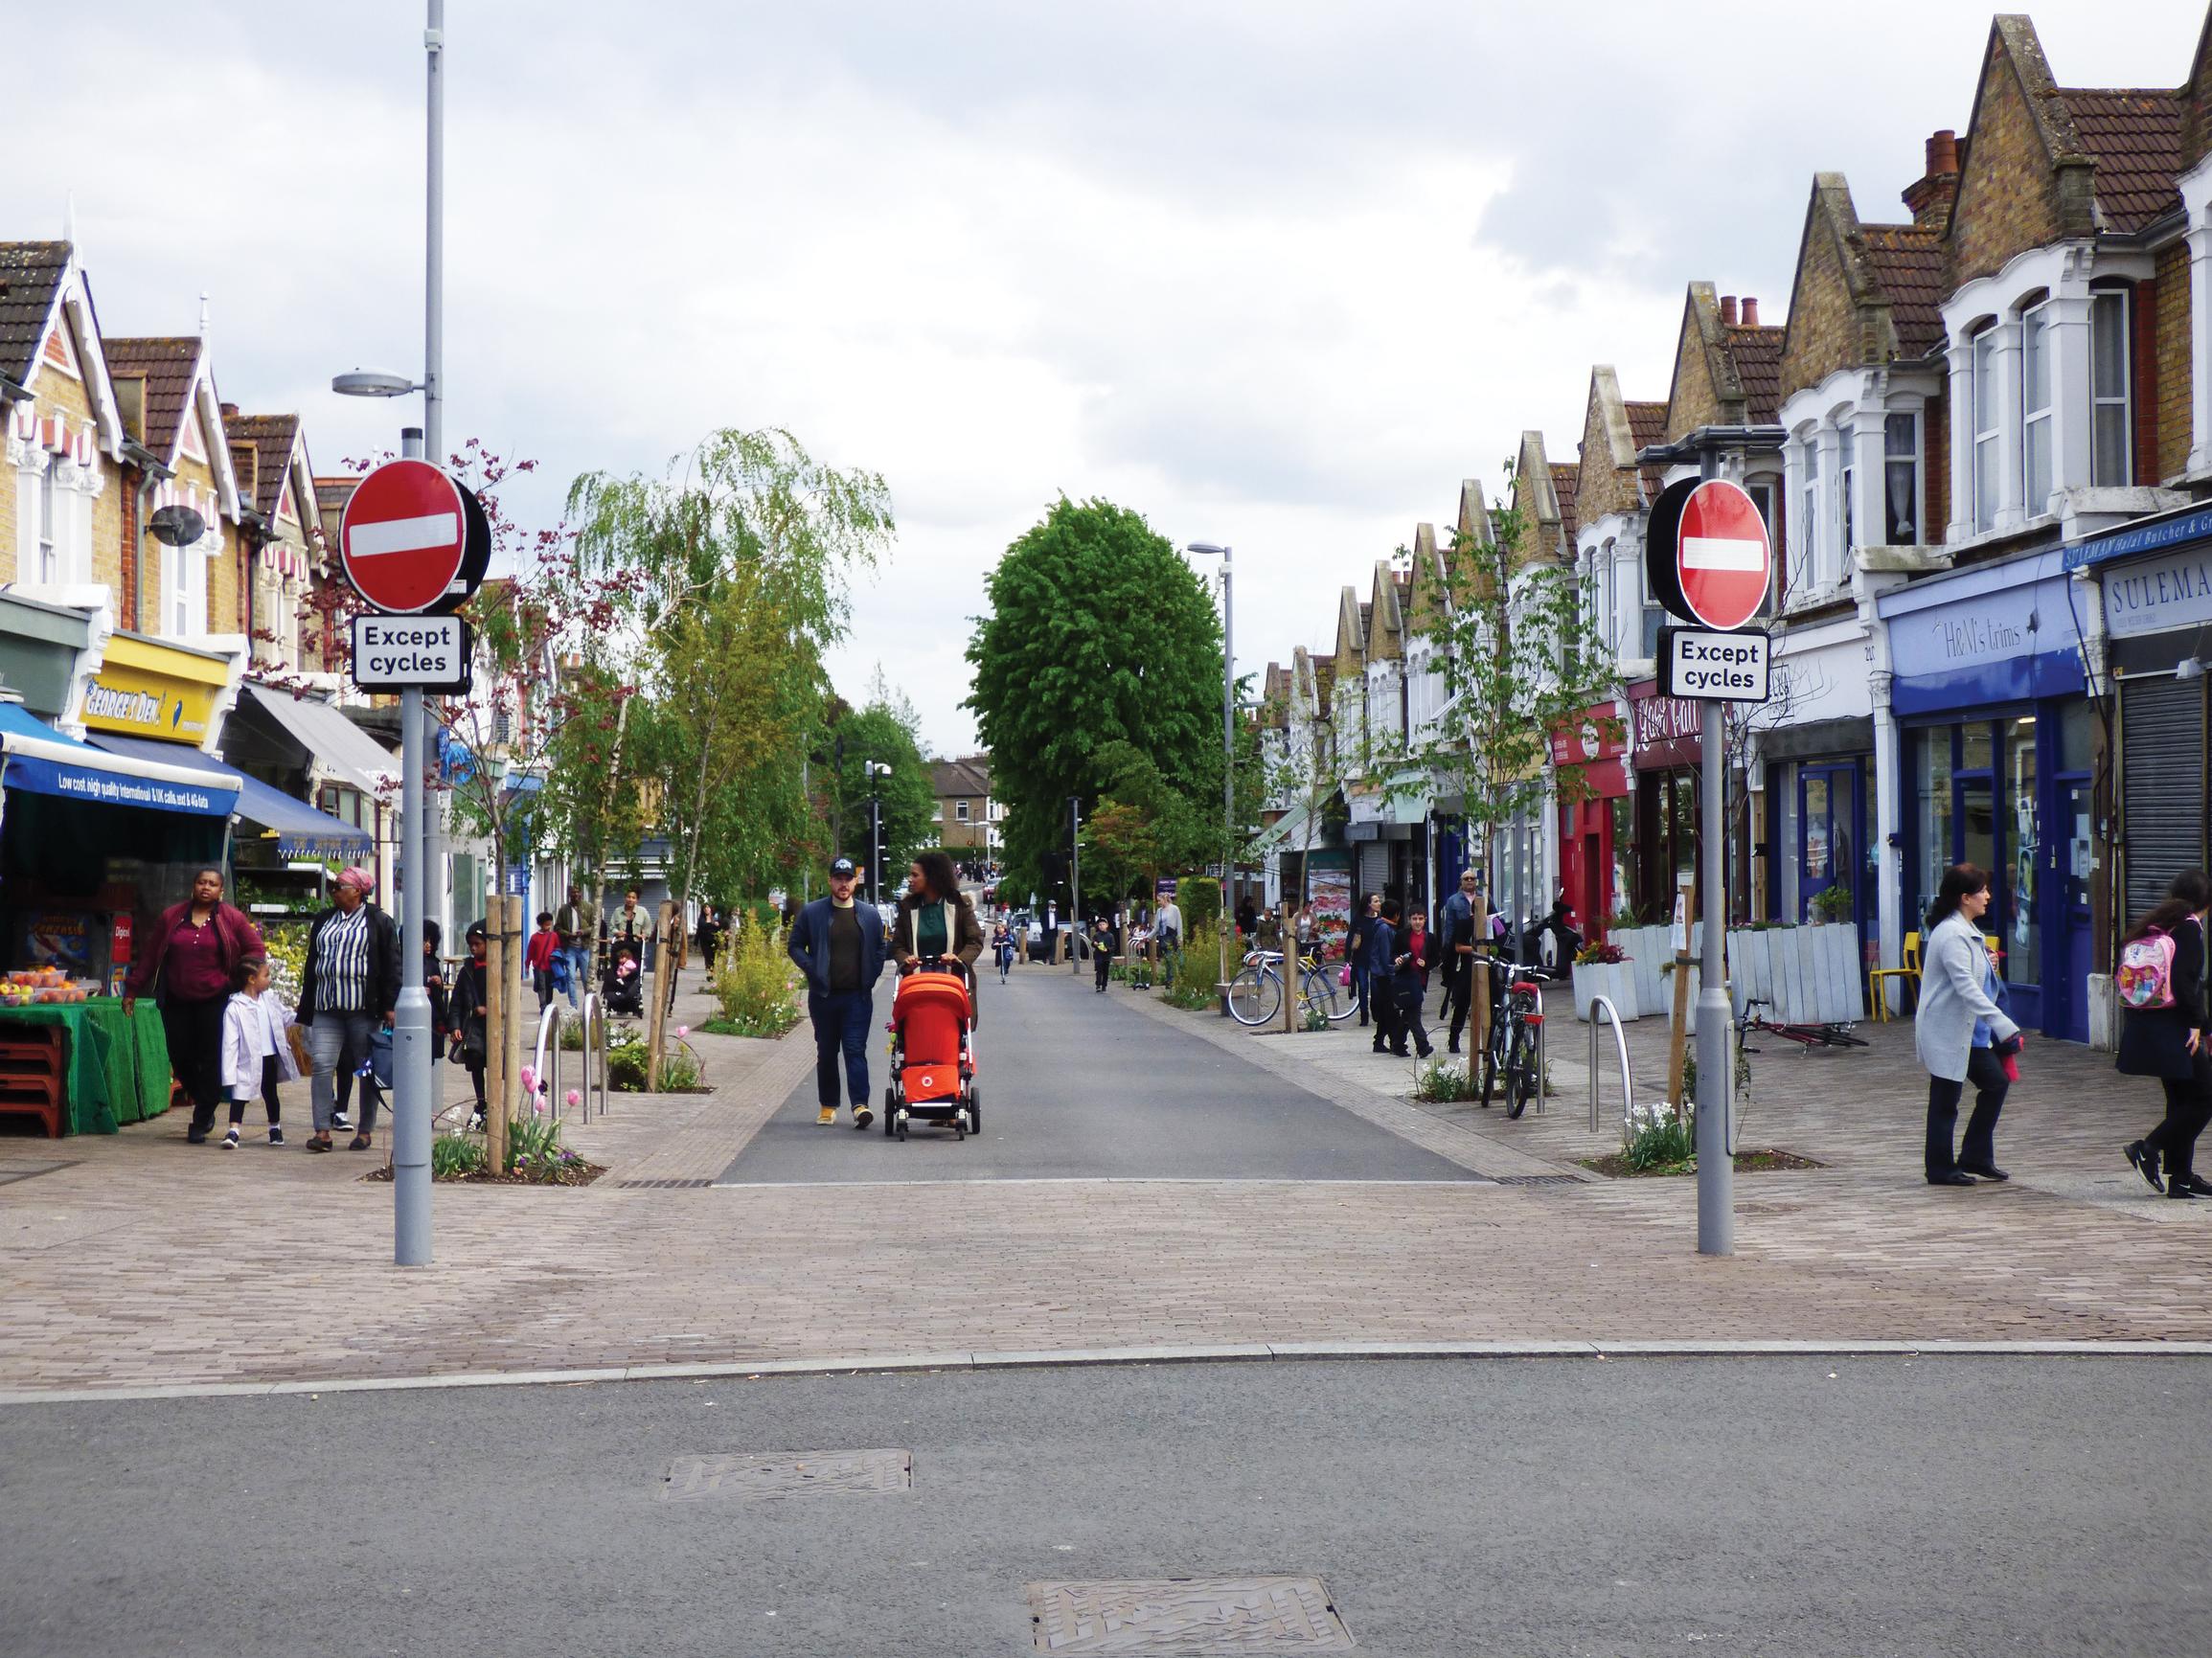 Motorised traffic is prohibited from using Francis Road in Leyton, Waltham Forest, between 10am and 8pm. The time ban is enforced with a fixed camera